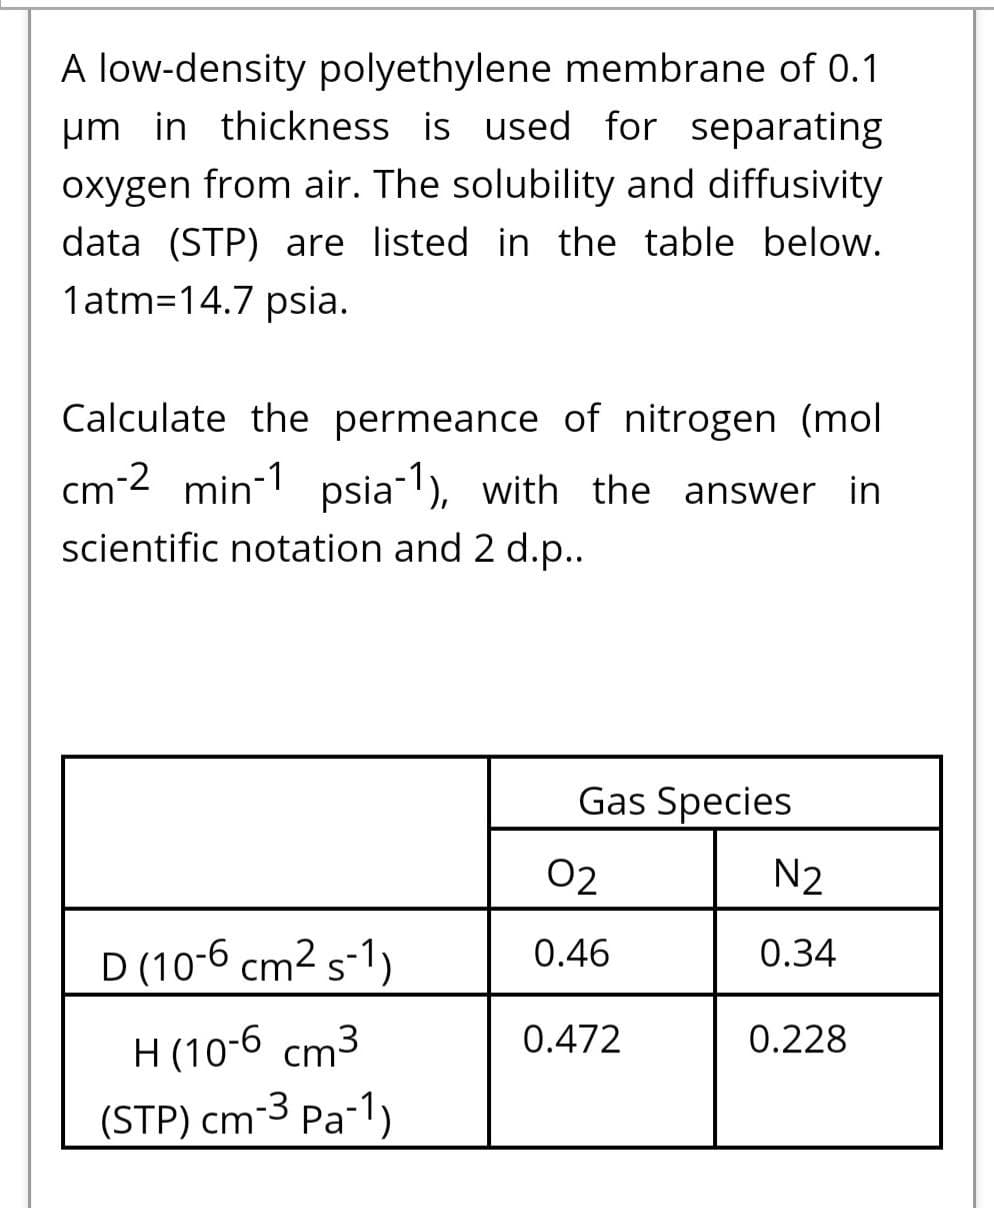 A low-density polyethylene membrane of 0.1
um in thickness is used for separating
oxygen from air. The solubility and diffusivity
data (STP) are listed in the table below.
1atm=14.7 psia.
Calculate the permeance of nitrogen (mol
cm-2 min-1 psia), with the answer in
scientific notation and 2 d.p..
Gas Species
02
N2
D (10-6 cm2 s-1)
0.46
0.34
H (10-6 cm3
0.472
0.228
(STP) cm-3 Pa-1)
